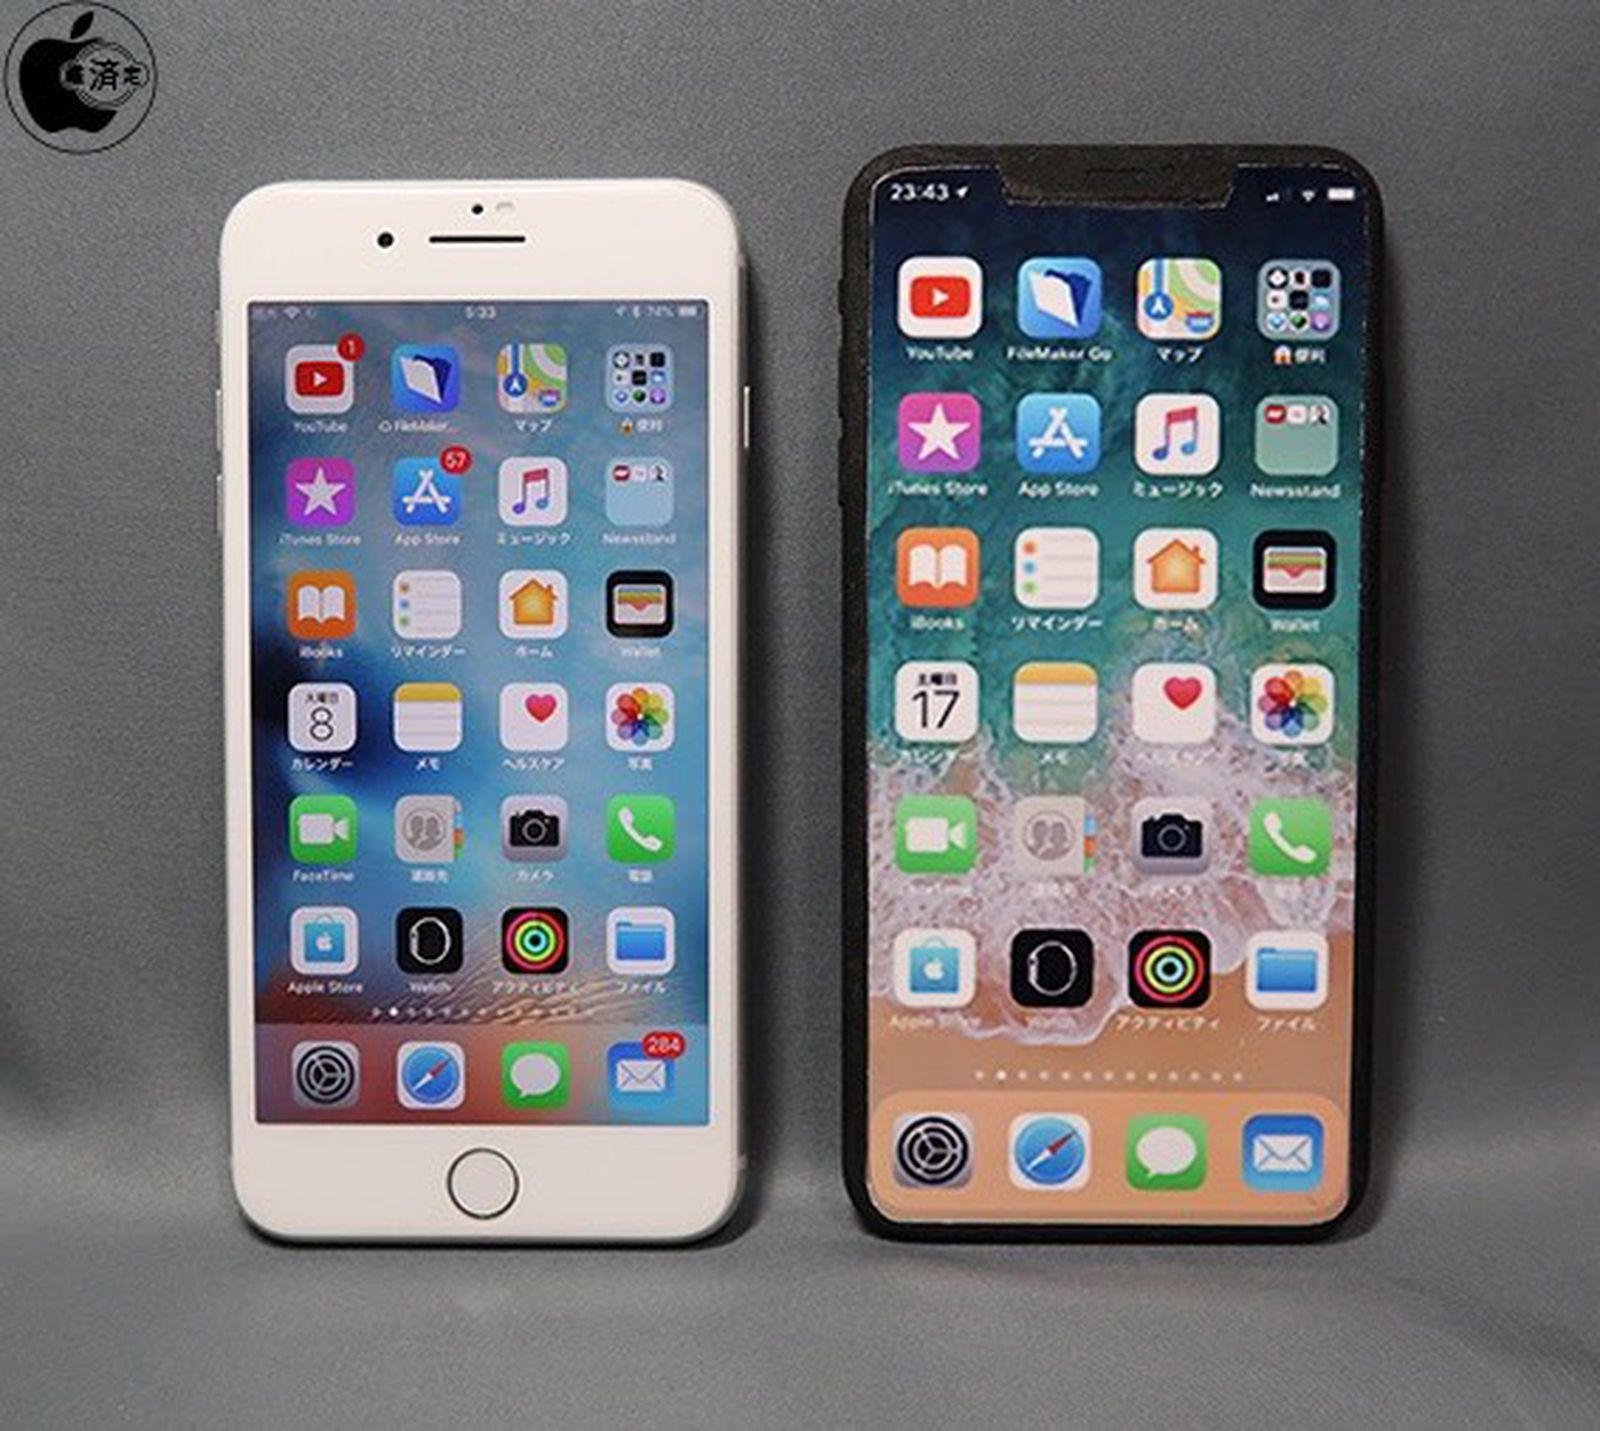 2018 6 5 Inch Iphone To Be Similar In Size To Iphone 8 Plus Ios 12 Could Feature Horizontal Face Id Support Macrumors